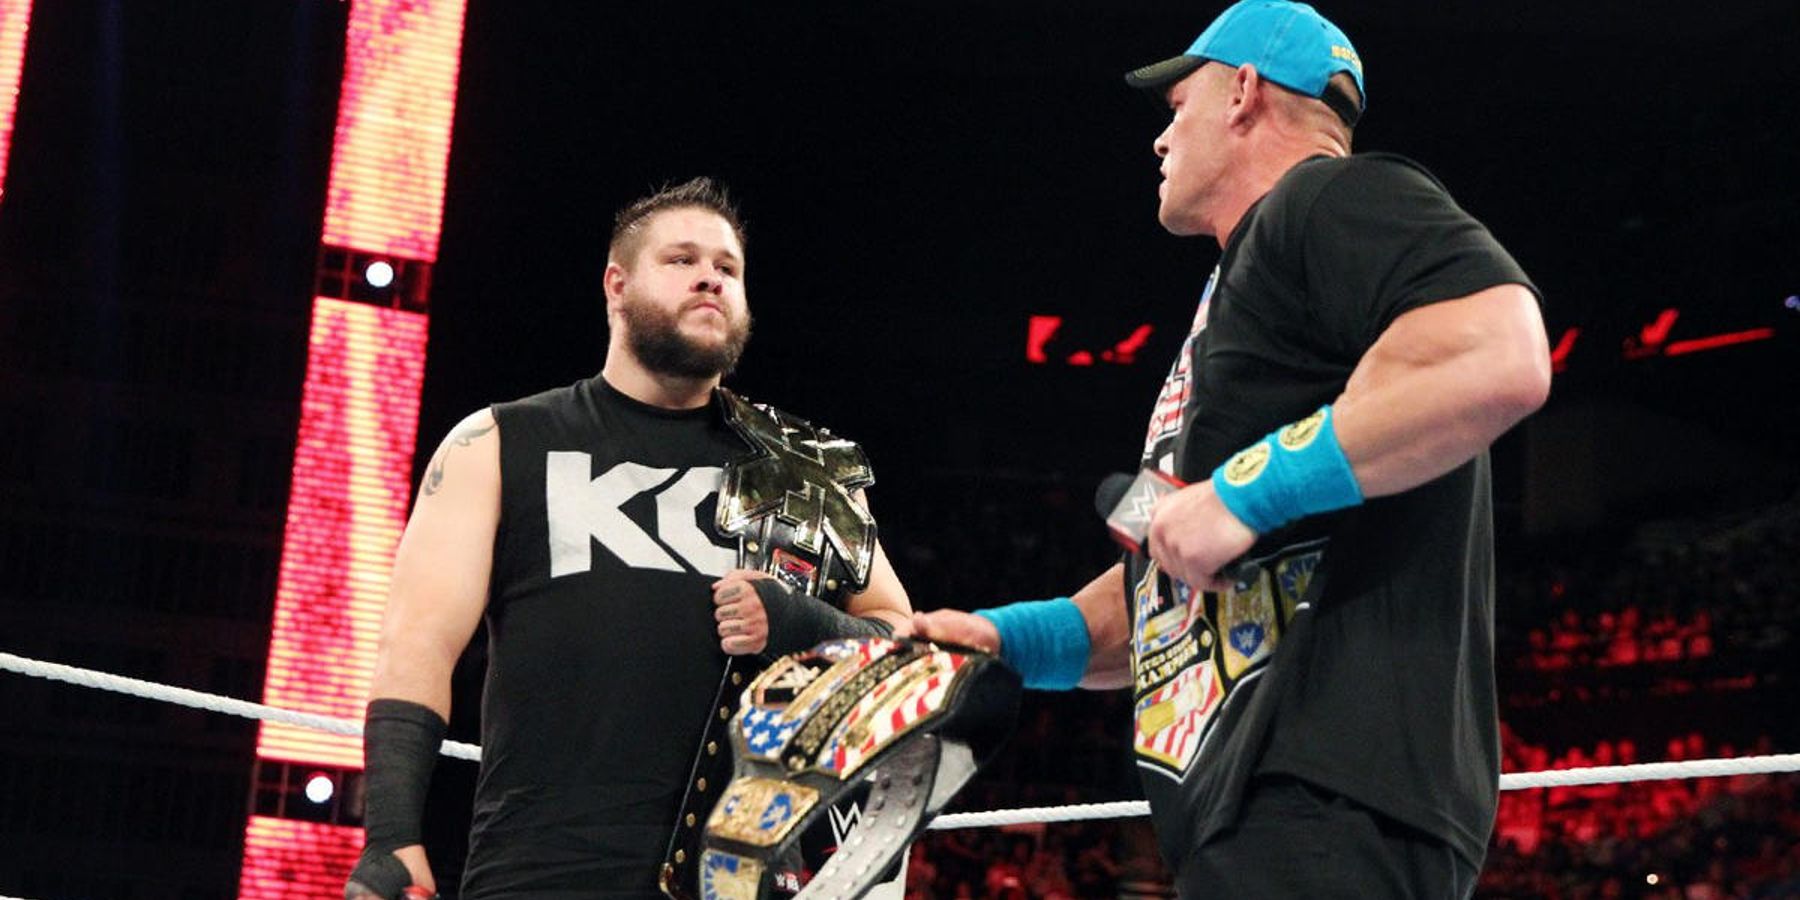 John Cena confronts Kevin Owens after losing to him in shocking fashion at WWE Elimination Chamber.